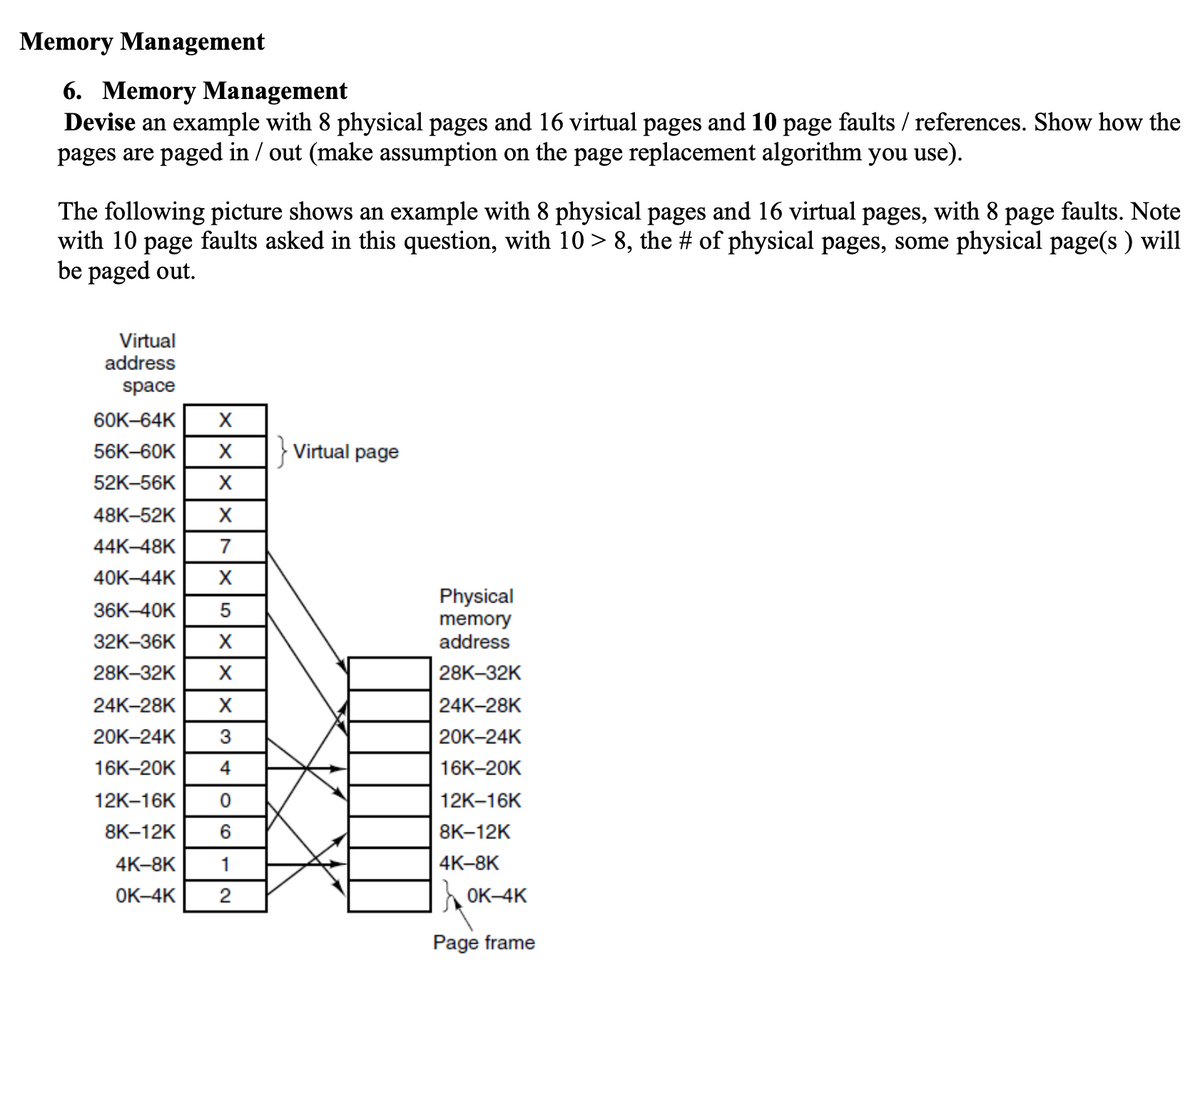 Memory Management
6. Memory Management
Devise an example with 8 physical pages and 16 virtual pages and 10 page faults / references. Show how the
pages are paged in / out (make assumption on the page replacement algorithm you use).
The following picture shows an example with 8 physical pages and 16 virtual pages, with 8 page faults. Note
with 10 page faults asked in this question, with 10 > 8, the # of physical pages, some physical page(s) will
be paged out.
Virtual
address
space
60K-64K X
56K-60K X } Virtual page
52K-56K X
48K-52K X
44K-48K 7
40K-44K X
36K-40K 5
32K-36K X
28K-32K X
X
24K-28K
20K-24K
16K-20K
12K-16K
8K-12K
4K-8K
1
OK-4K 2
306
4
Physical
memory
address
28K-32K
24K-28K
20K-24K
16K-20K
12K-16K
8K-12K
4K-8K
OK-4K
Page frame